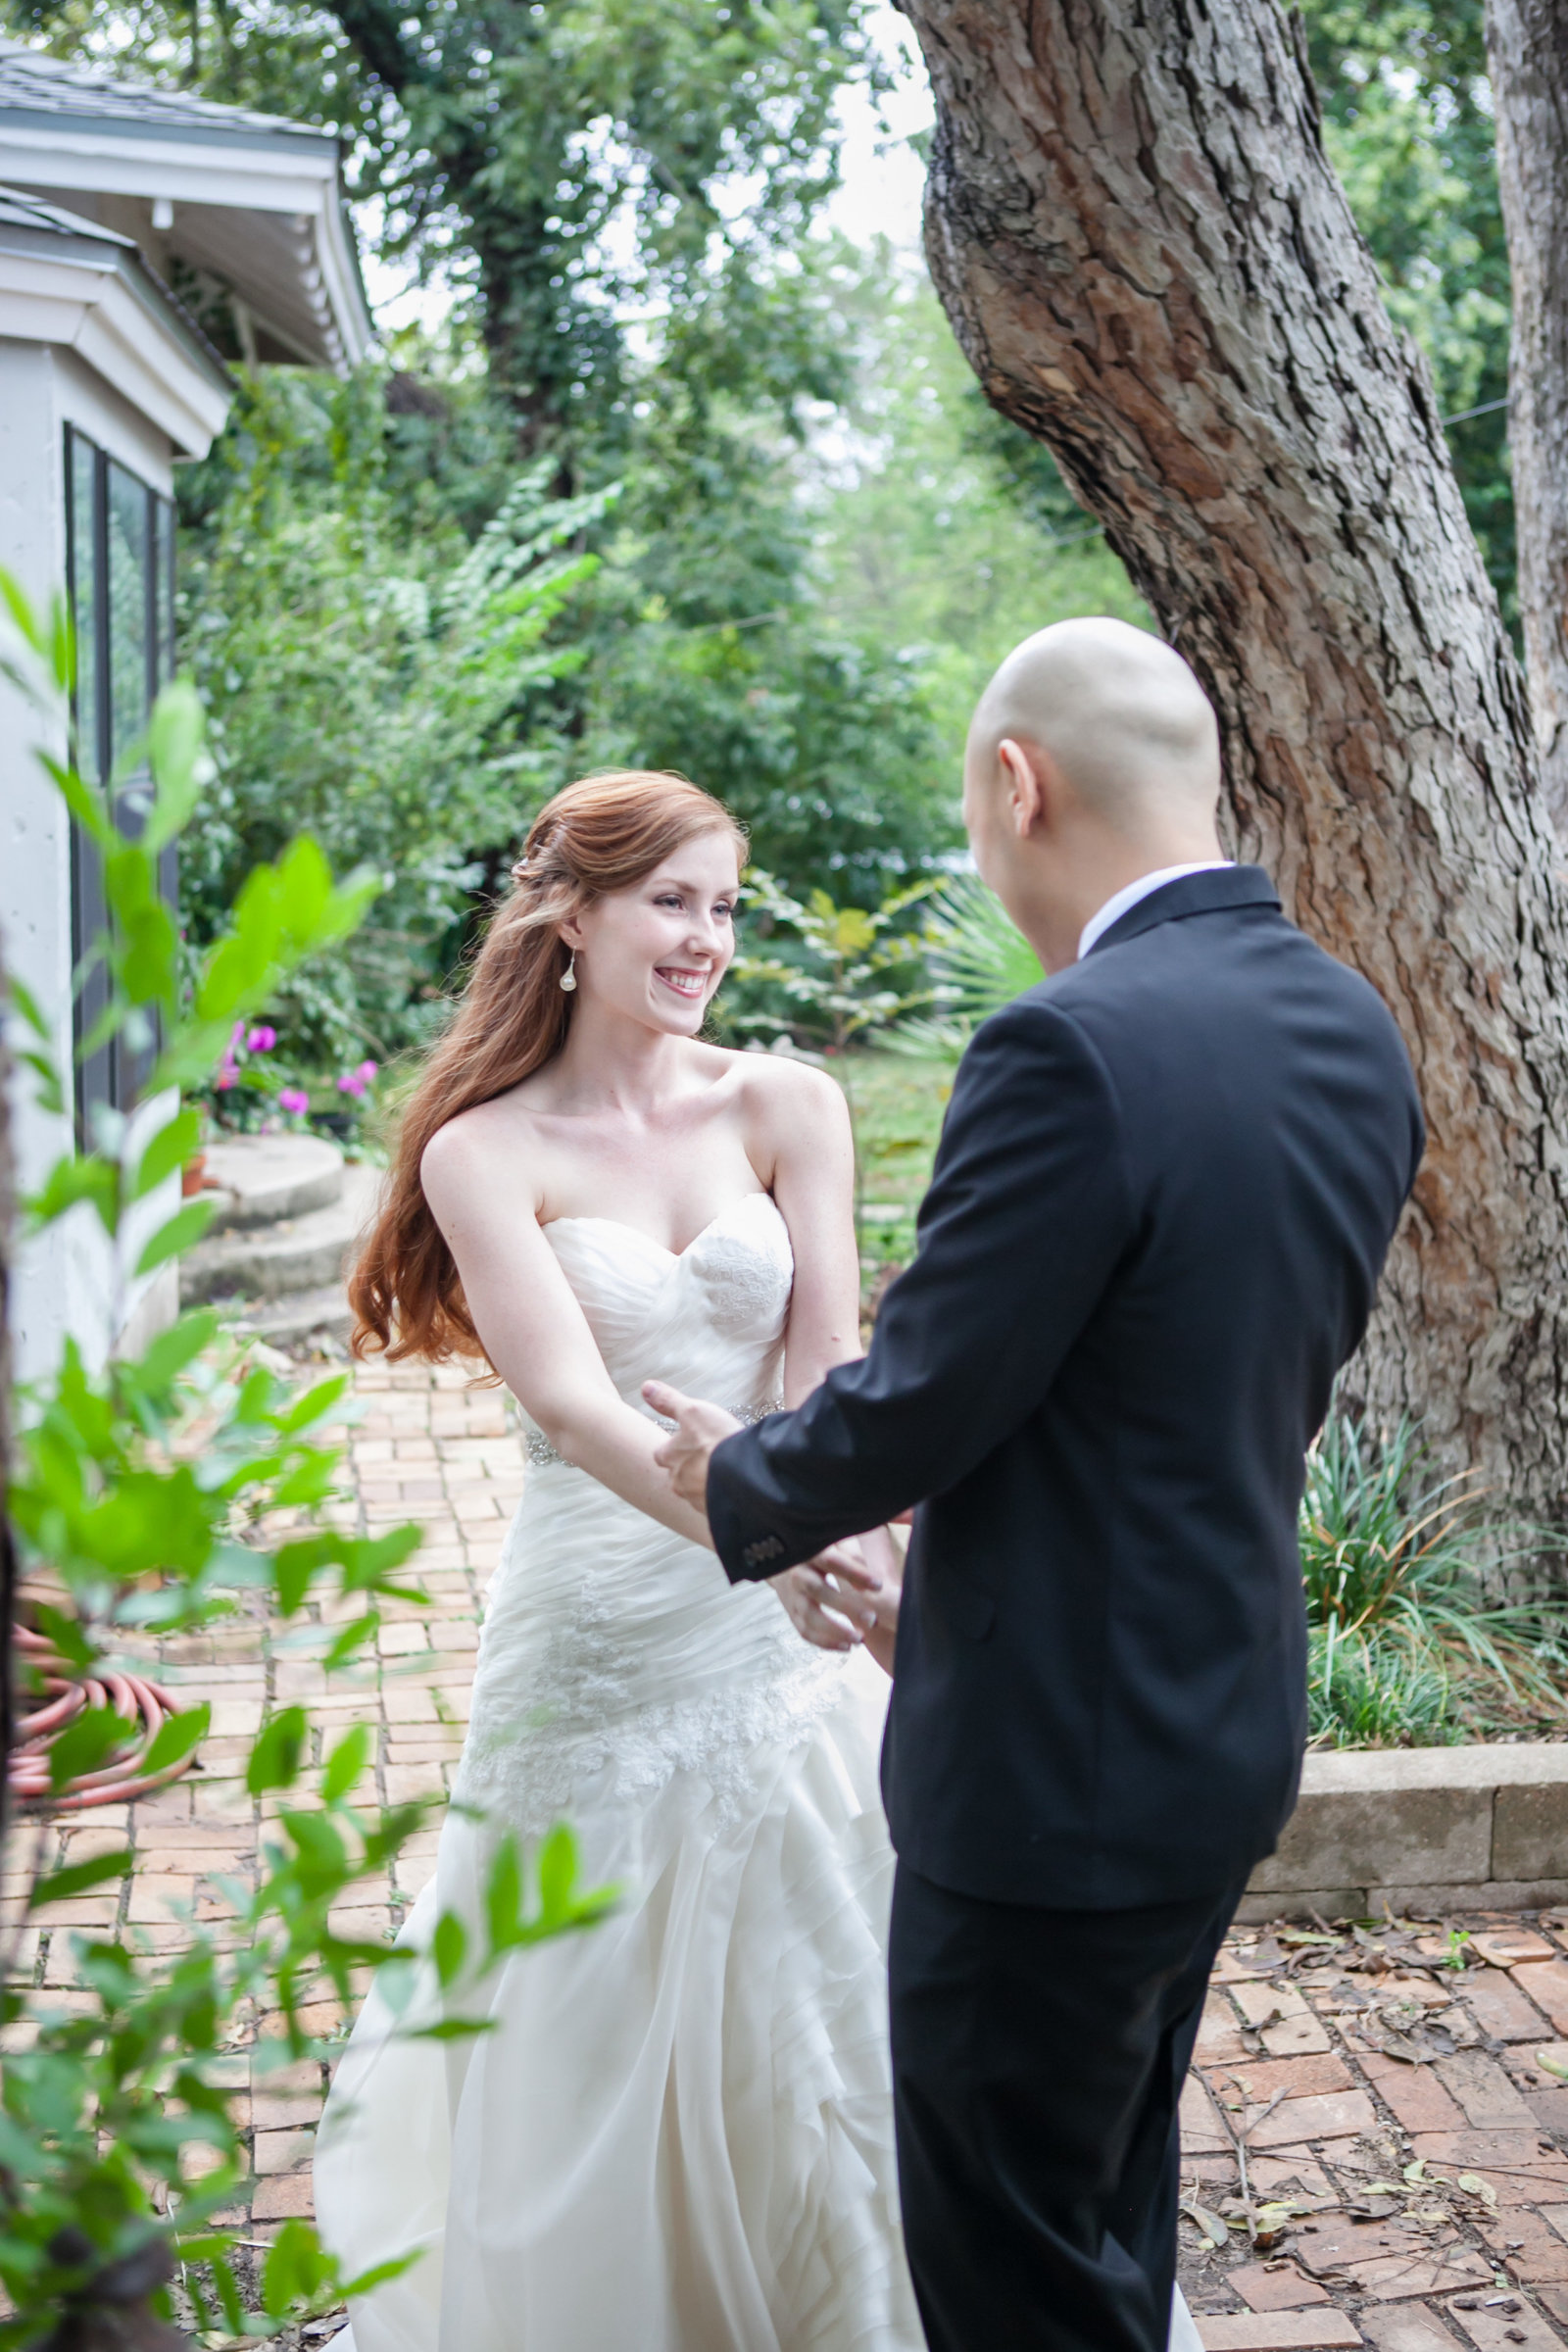 Austin Family Photographer, Tiffany Chapman Photography bride and groom black first look photo